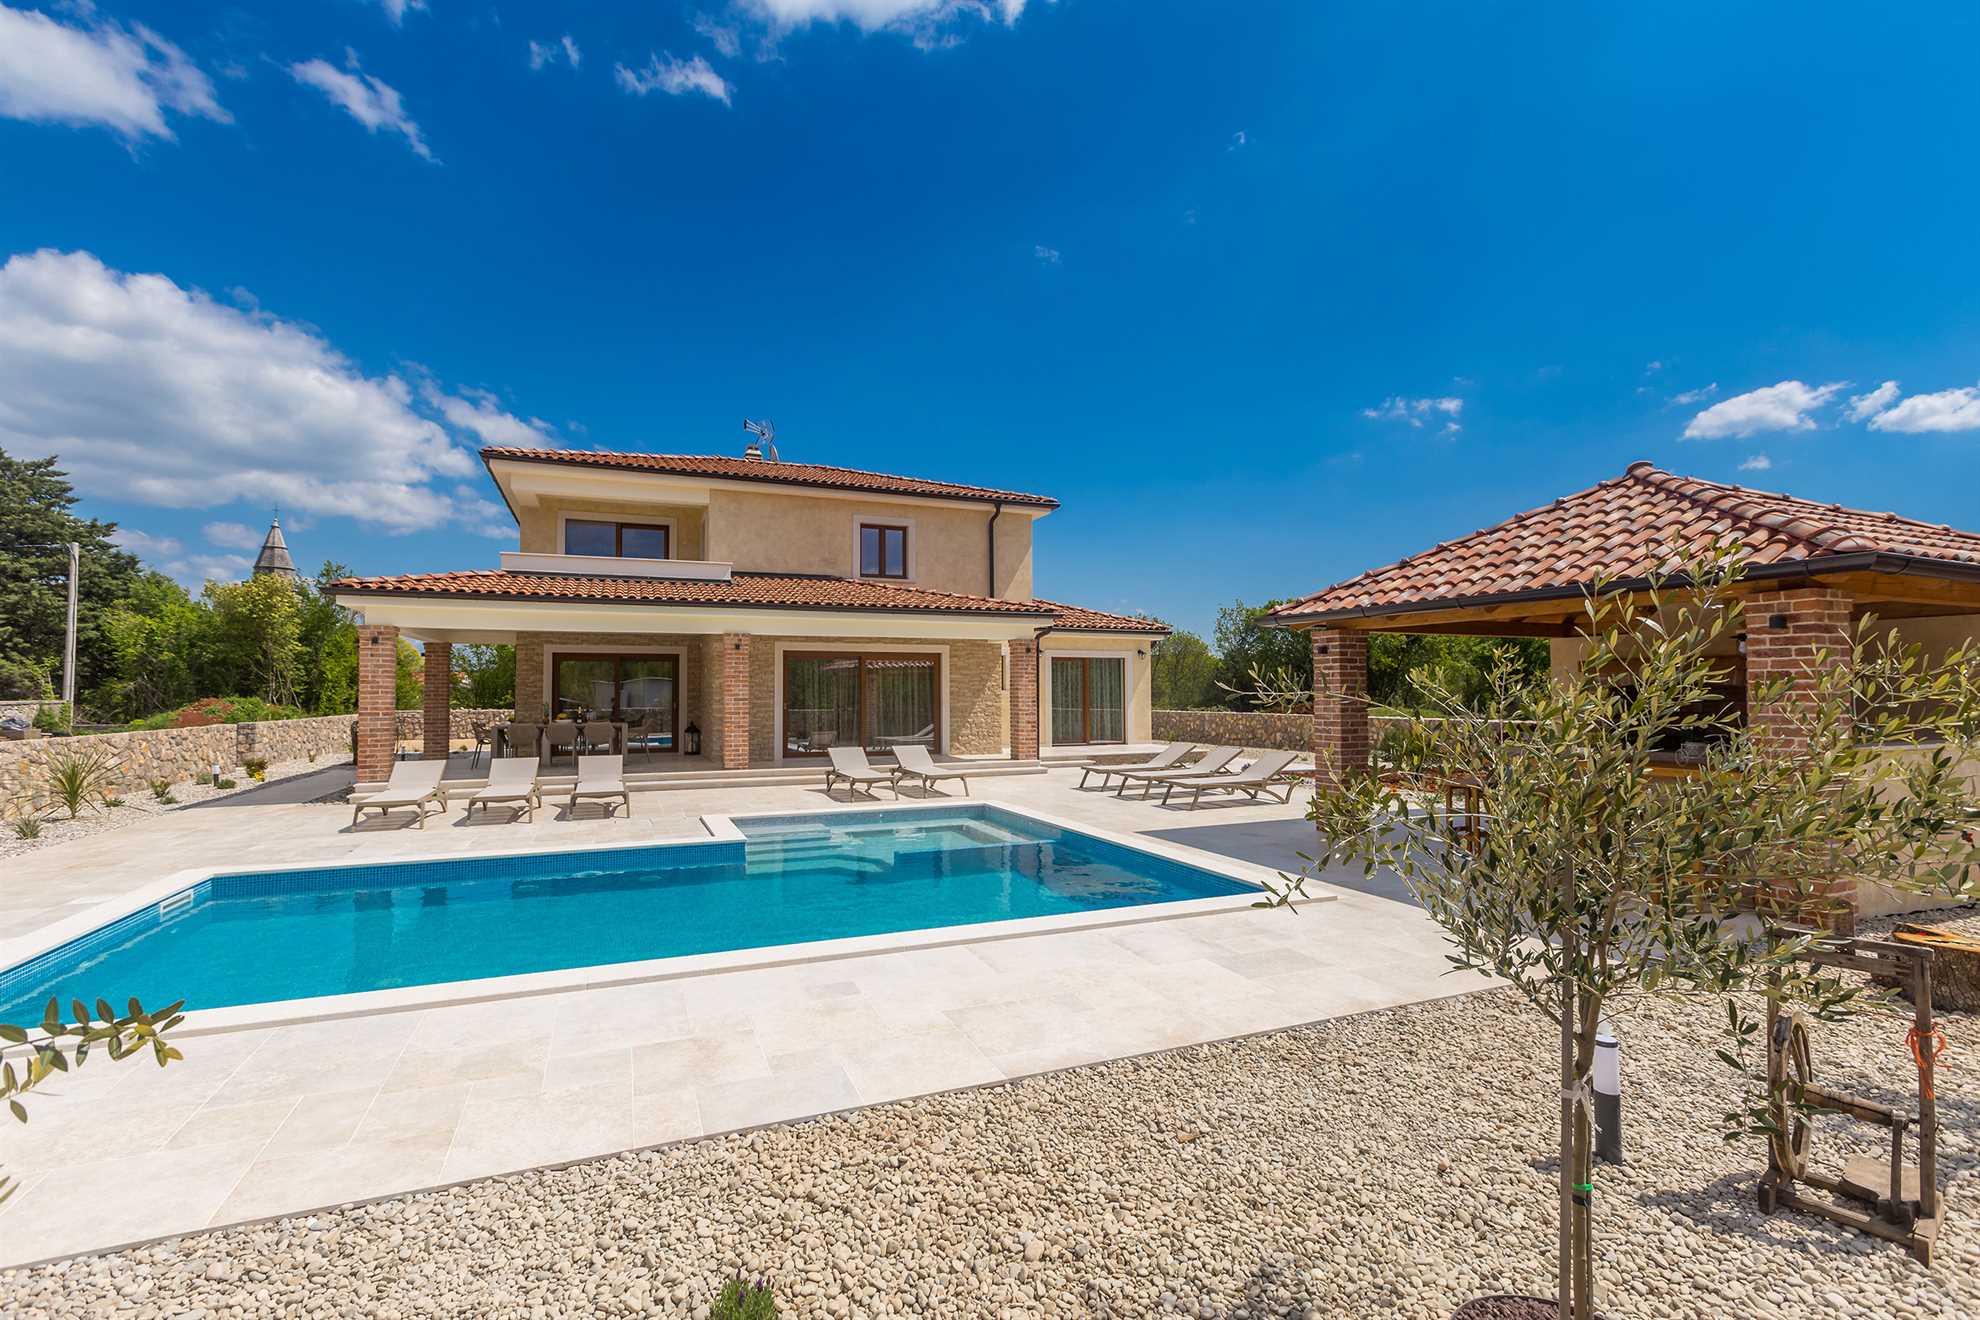 Villa QUERCUS with heated pool